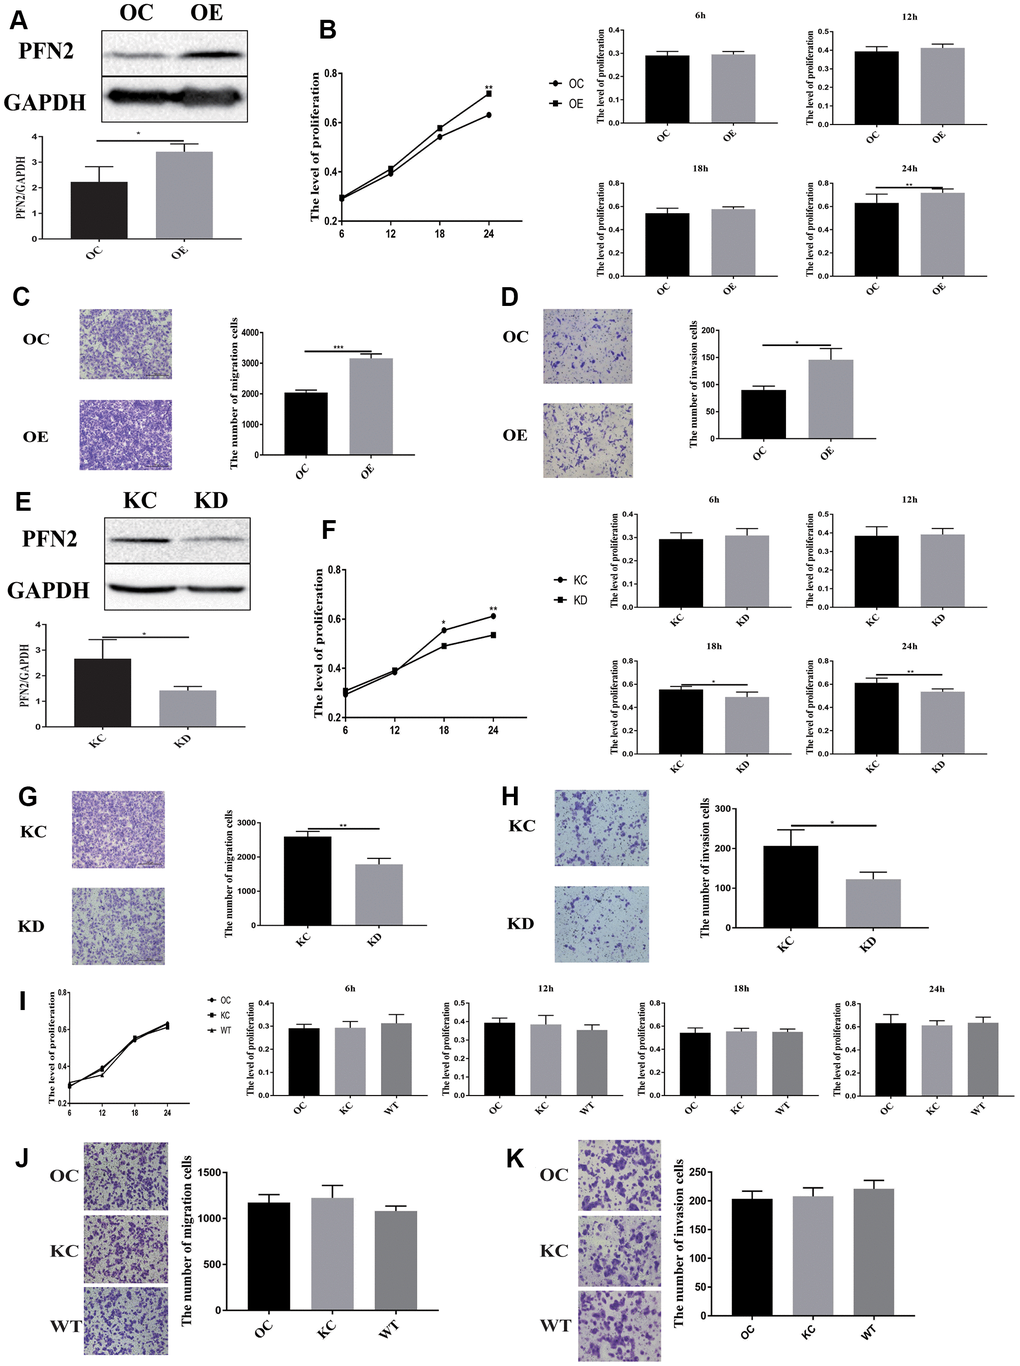 PFN2 overexpression promotes the proliferation, migration, and invasion of SCLC cells. PFN2 expression is significantly increased in H446 cells with PFN2 overexpression (P=0.02) (A). PFN2 overexpression shows significantly improved proliferation (P=0.6133, 0.1860, 0.0956, and 0.0278 at 6 h, 12 h, 18 h, and 24 h, respectively) (B), migration (P=0.0001) (C), and invasion (P=0.018) (D) of H446 cells. PFN2 expression is significantly decreased in H446 cells with PFN2 knockdown (P=0.03) (E). PFN2 knockdown shows markedly inhibited proliferation (P=0.3740, 0.7718, 0.0114, and 0.0027 at 6 h, 12 h, 18 h, and 24 h, respectively) (F), migration (P=0.002) (G), and invasion (P=0.0301) (H) of H446 cells (n=3). Overexpression control (OC), knockdown control (KC), and wild type (WT) of H446 cells show similar proliferation (P=0.1208, 0.2105, 0.7942, and 0.03275 at 6 h, 12 h, 18 h, and 24 h respectively) (I), migration (P=0.2721) (J), and invasion (P=0.3603) (K).